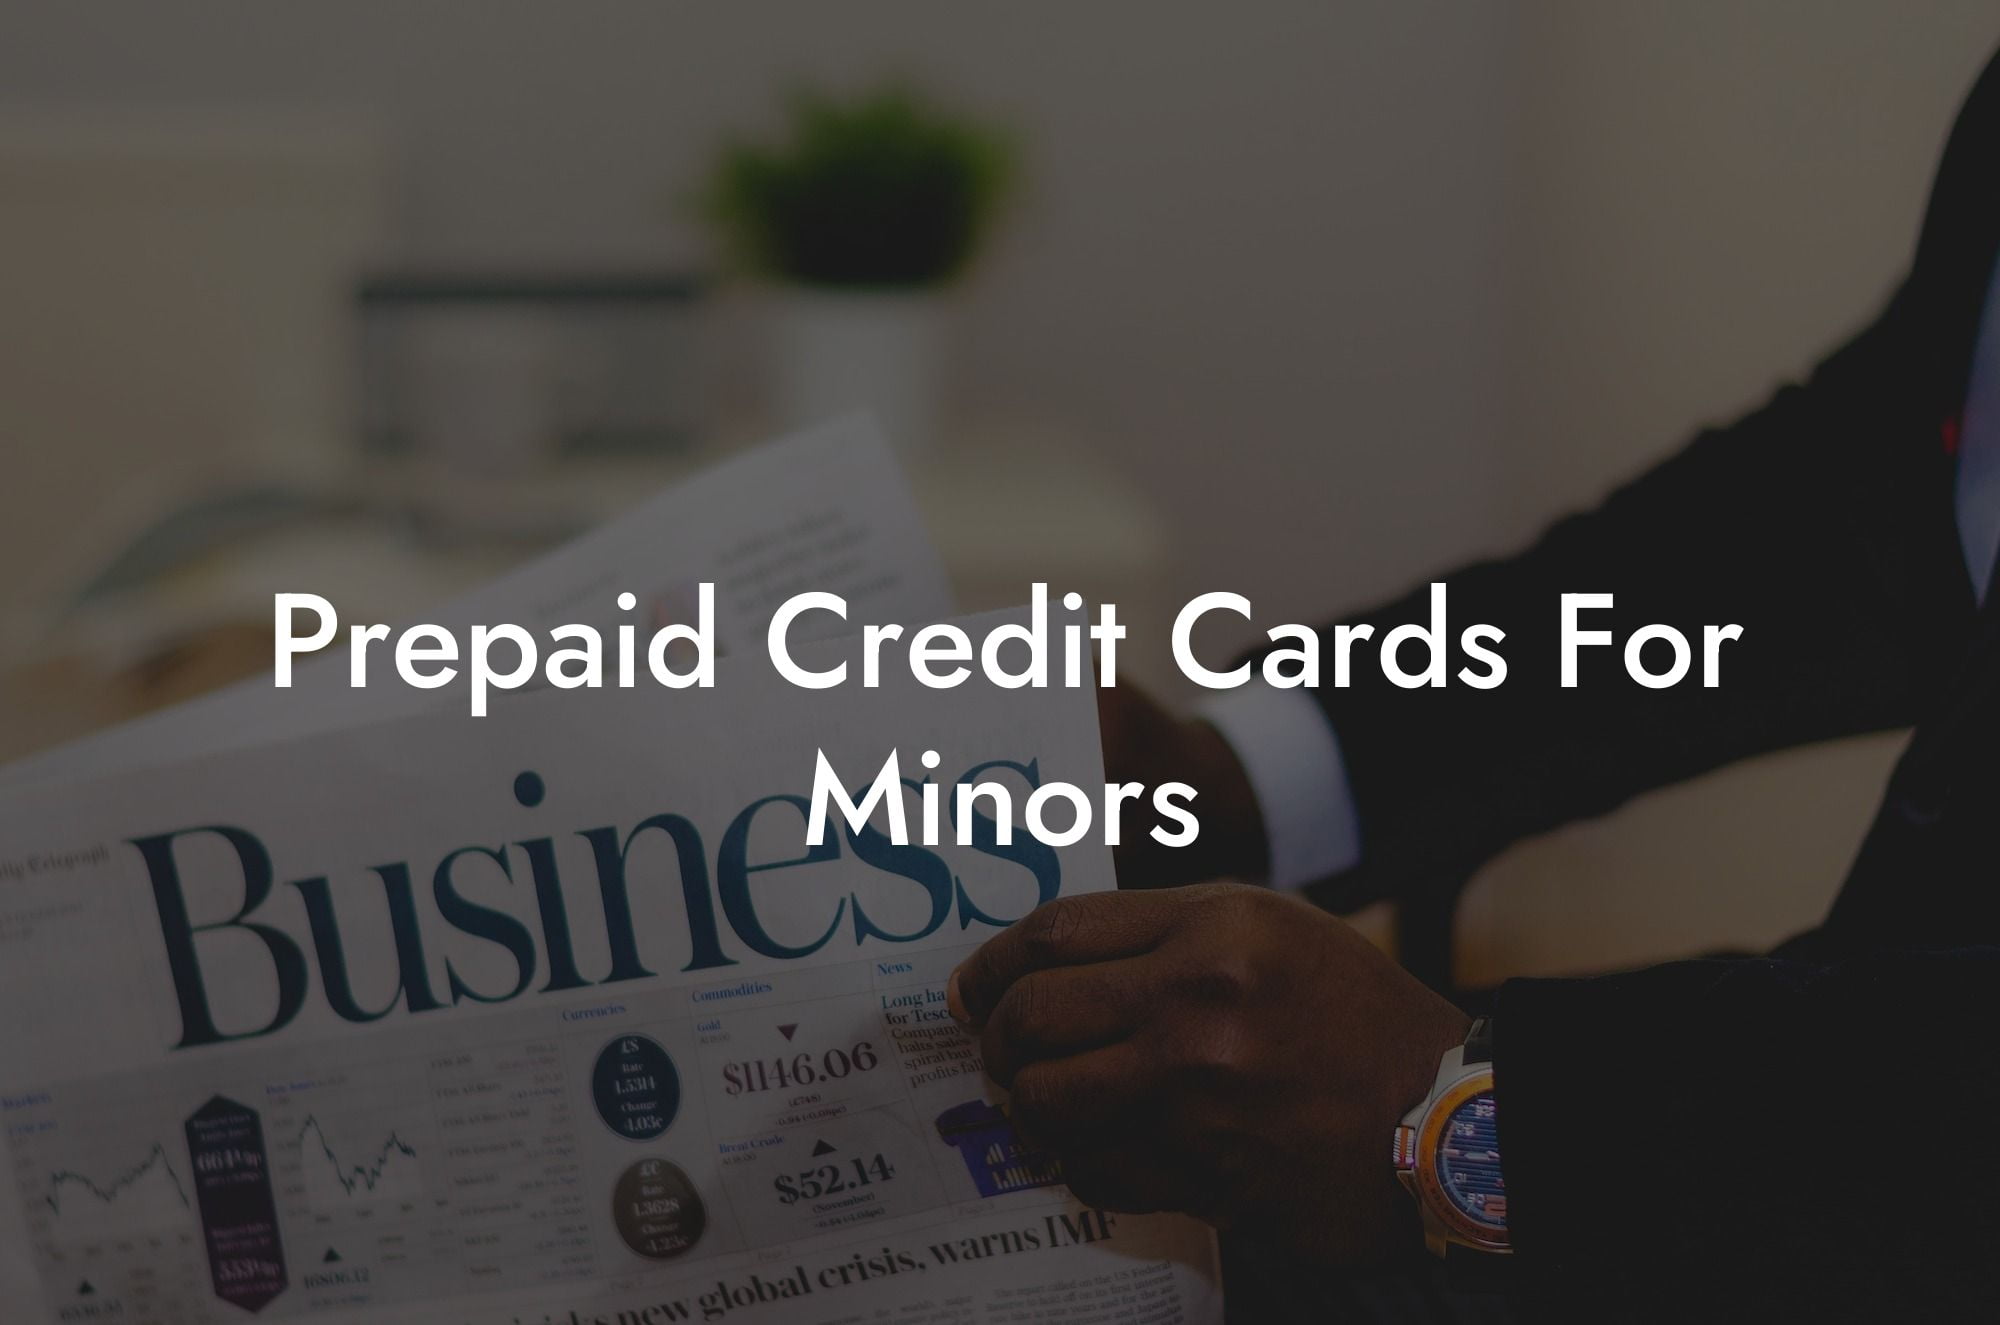 Prepaid Credit Cards For Minors